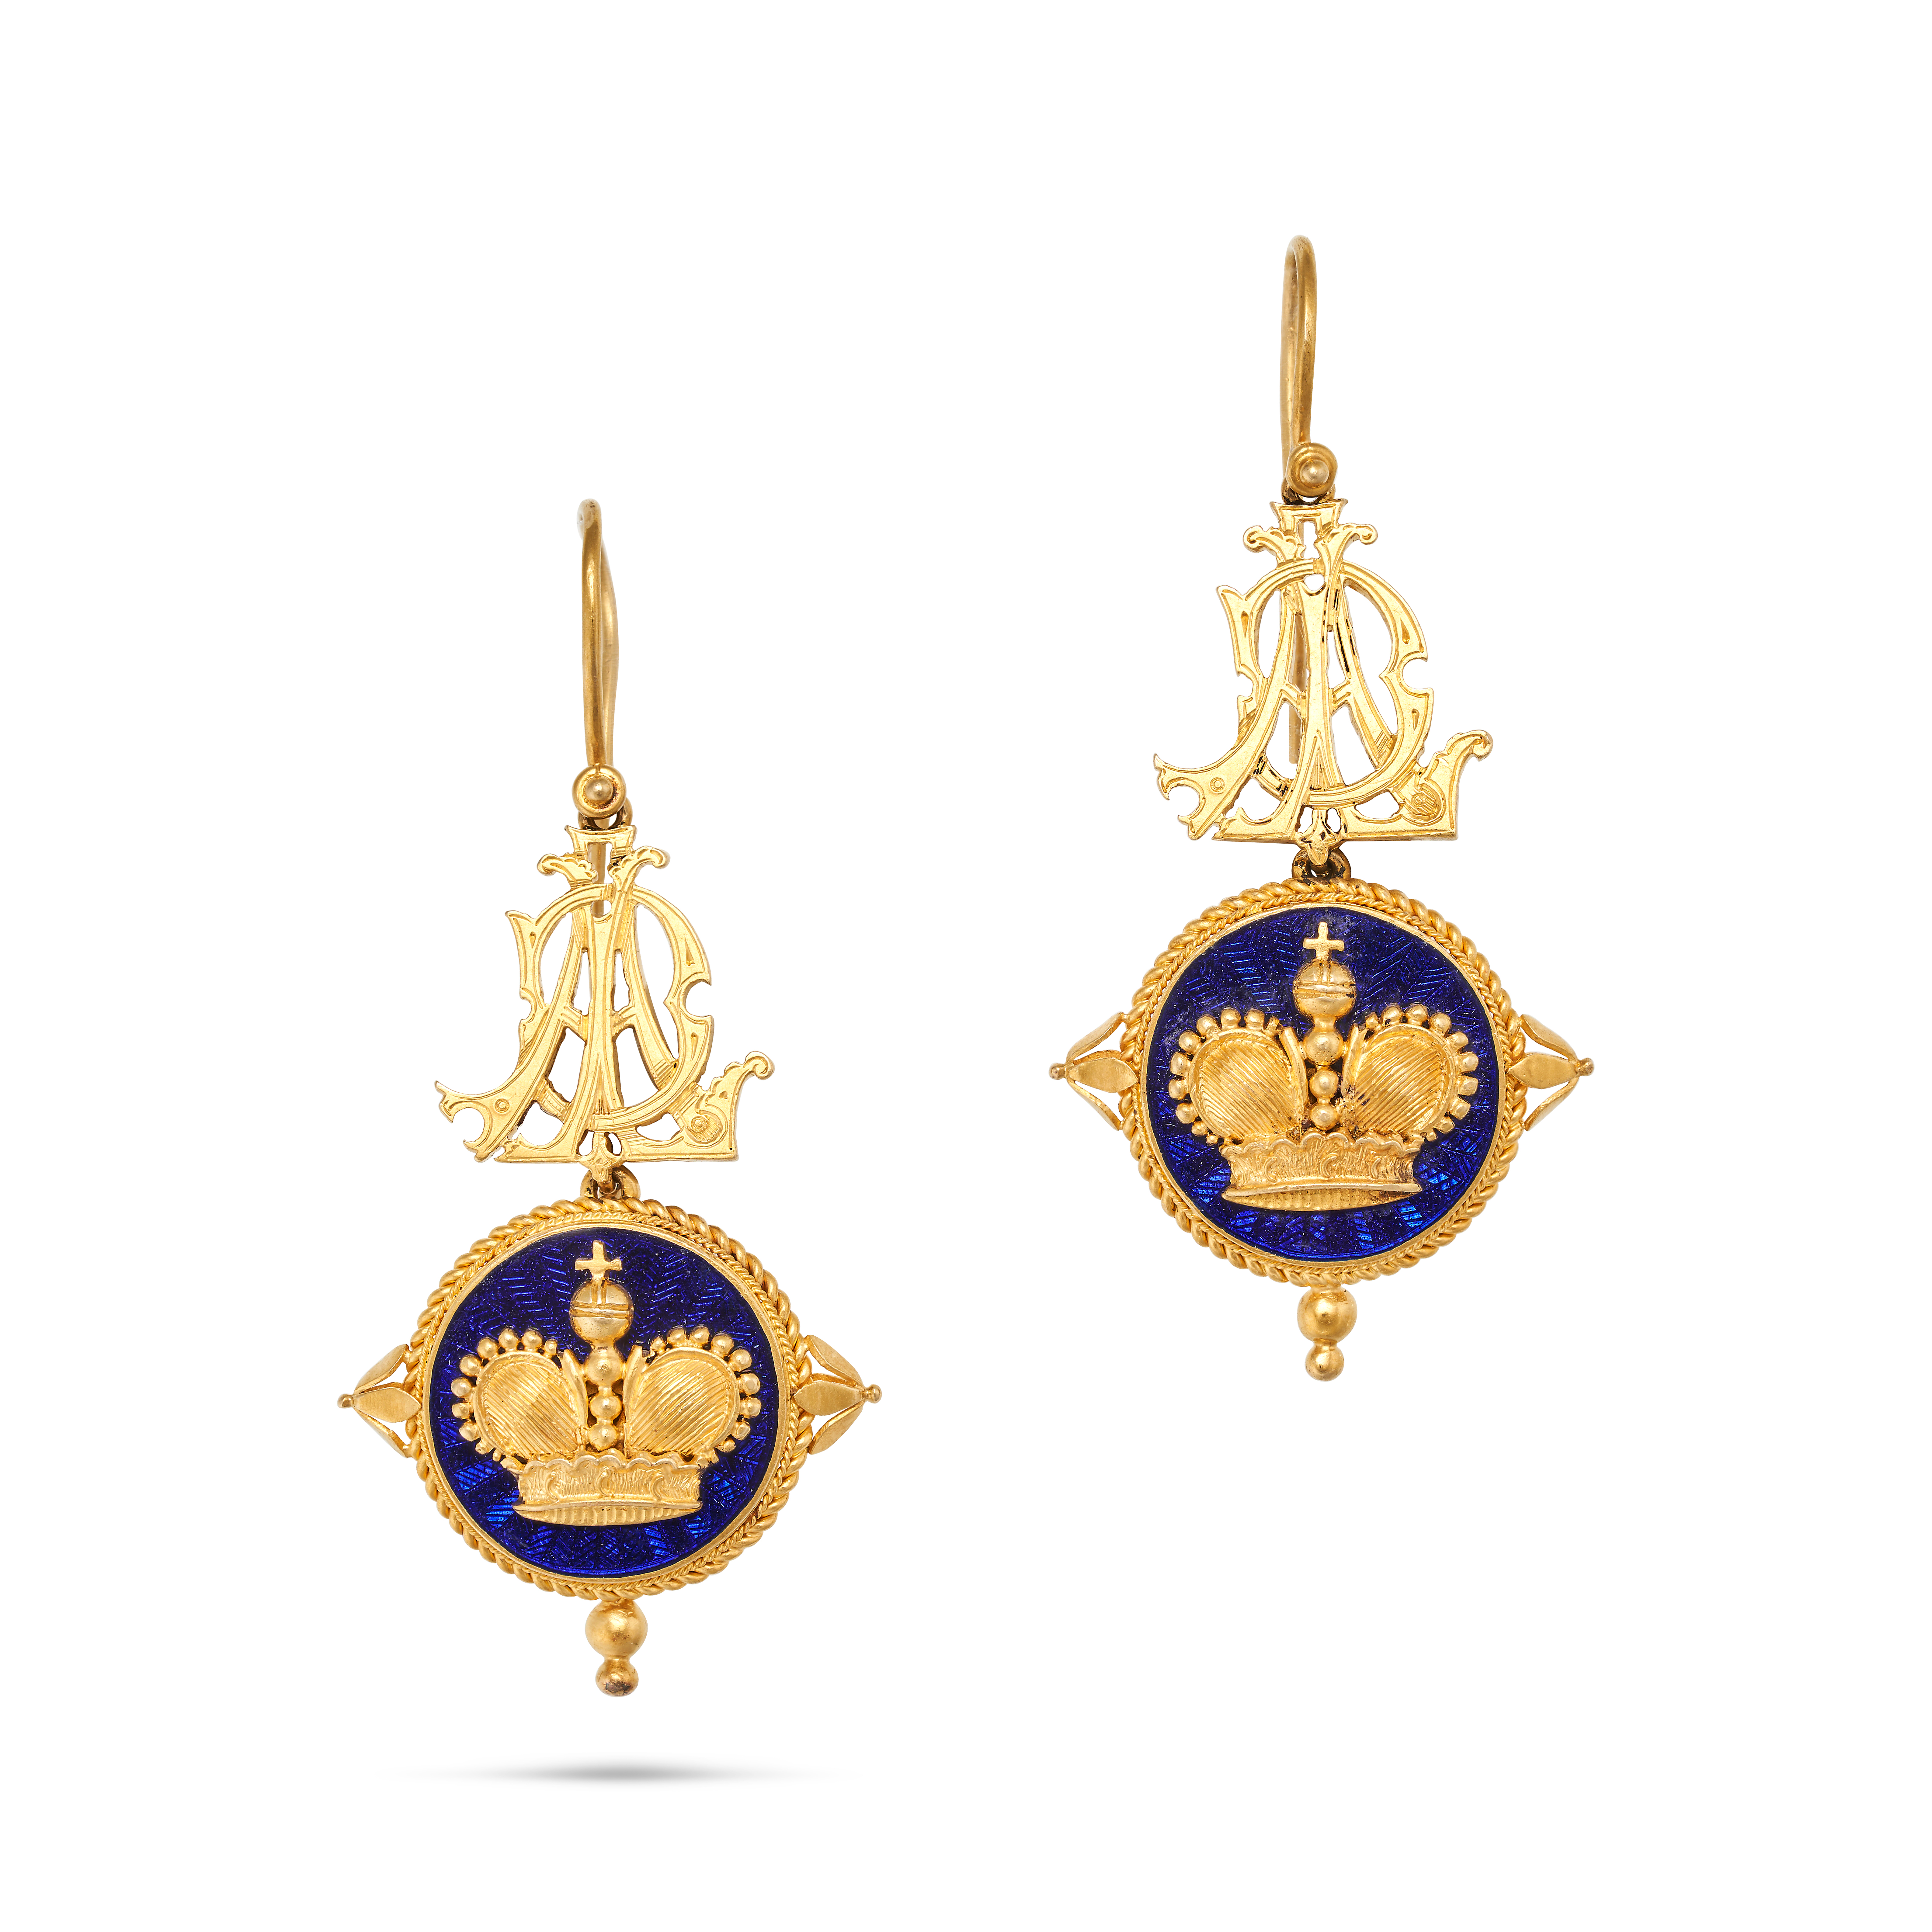 JOHN BROGDEN, A PAIR OF ENAMEL AND GOLD DROP EARRINGS in yellow gold, each designed with an ornat...